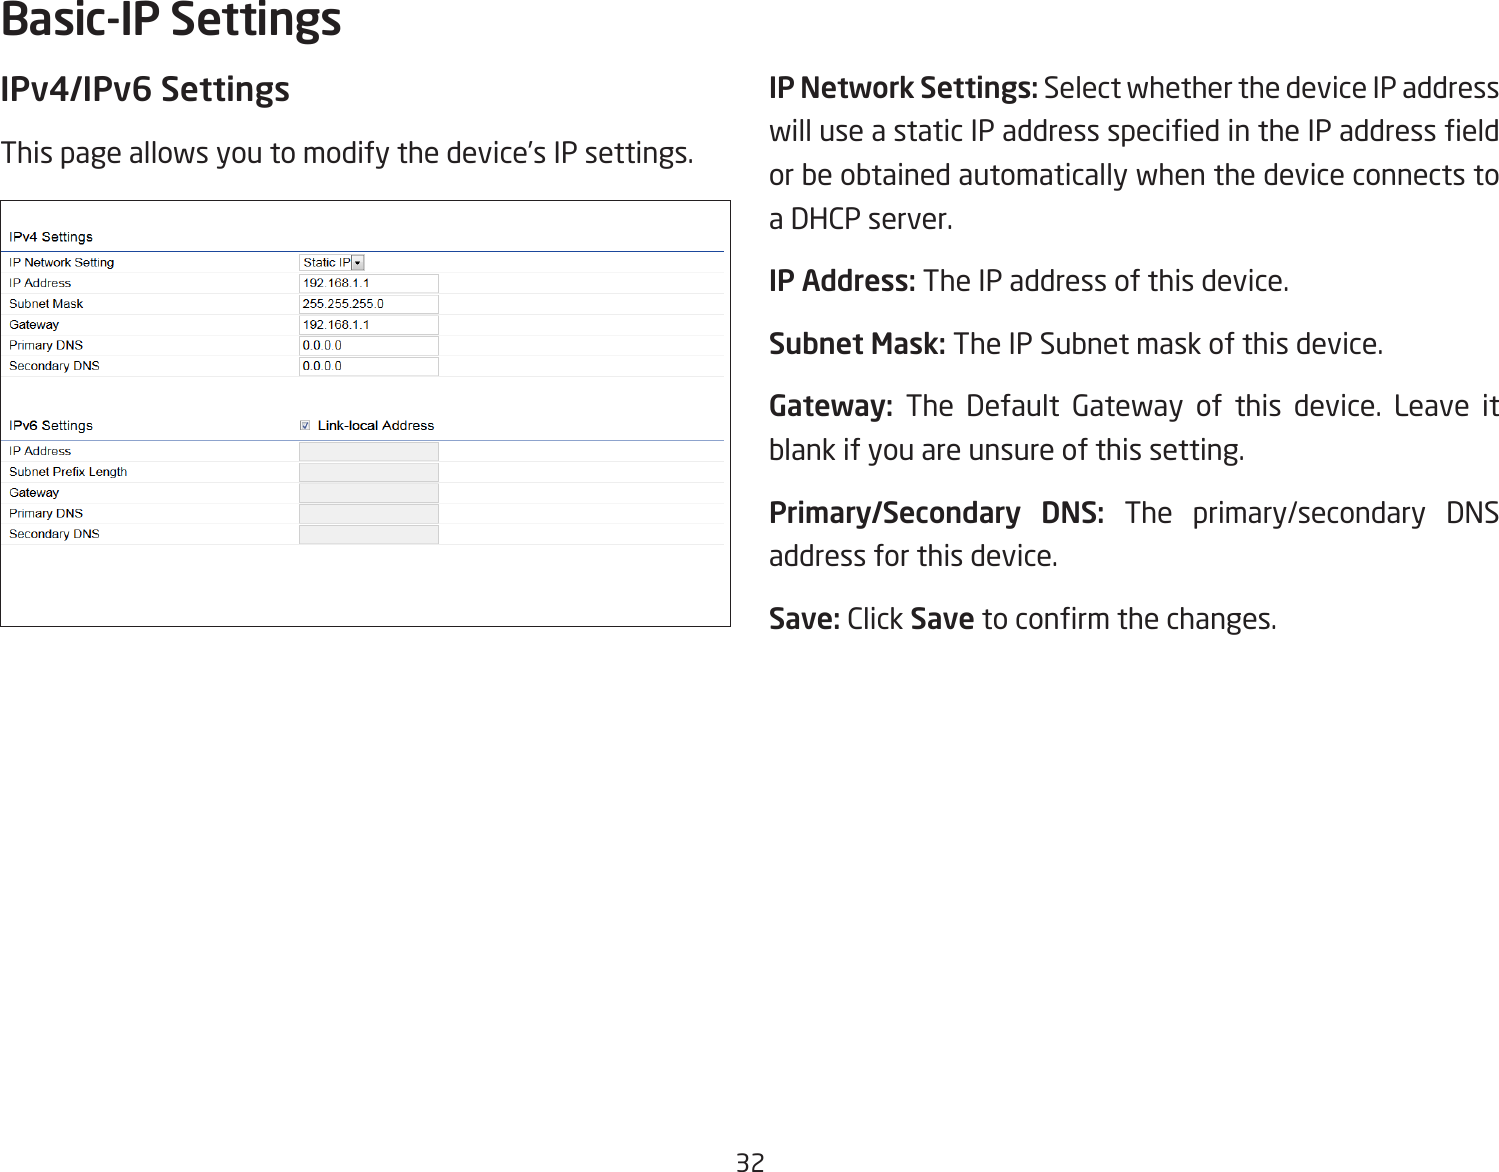 32IPv4/IPv6 SettingsThis page allows you to modify the device’s IP settings.IP Network Settings: Select whether the device IP address will use a static IP address specied in the IP address eld or be obtained automatically when the device connects to a DHCP server.IP Address: The IP address of this device.Subnet Mask: The IP Subnet mask of this device.Gateway: The Default Gateway of this device. Leave it blank if you are unsure of this setting.Primary/Secondary DNS: The primary/secondary DNS address for this device.Save: Click Save to conrm the changes.Basic-IP Settings